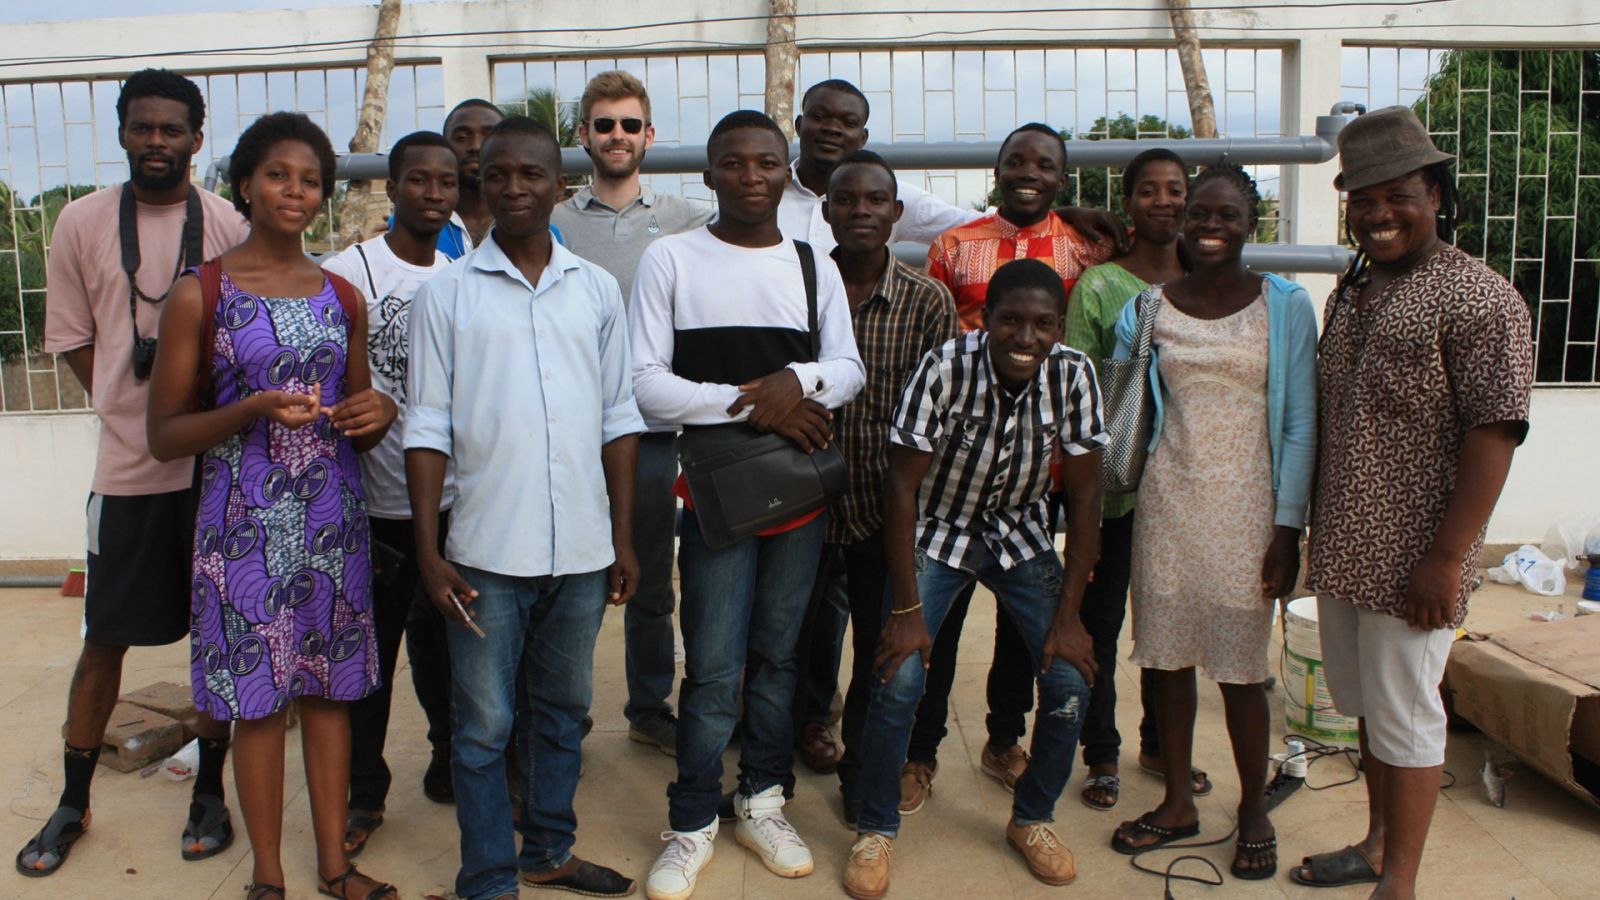 Scott Massey (center, with sunglasses), a founder of Heliponix LLC, poses with residents of Togo who took part in a hands-on workshop on hydroponics in the small West Africa country, where many people survive on subsistence farming. The workshop was funded by the Mandela Washington Fellowship Reciprocal Exchange Component. (Photo provided)